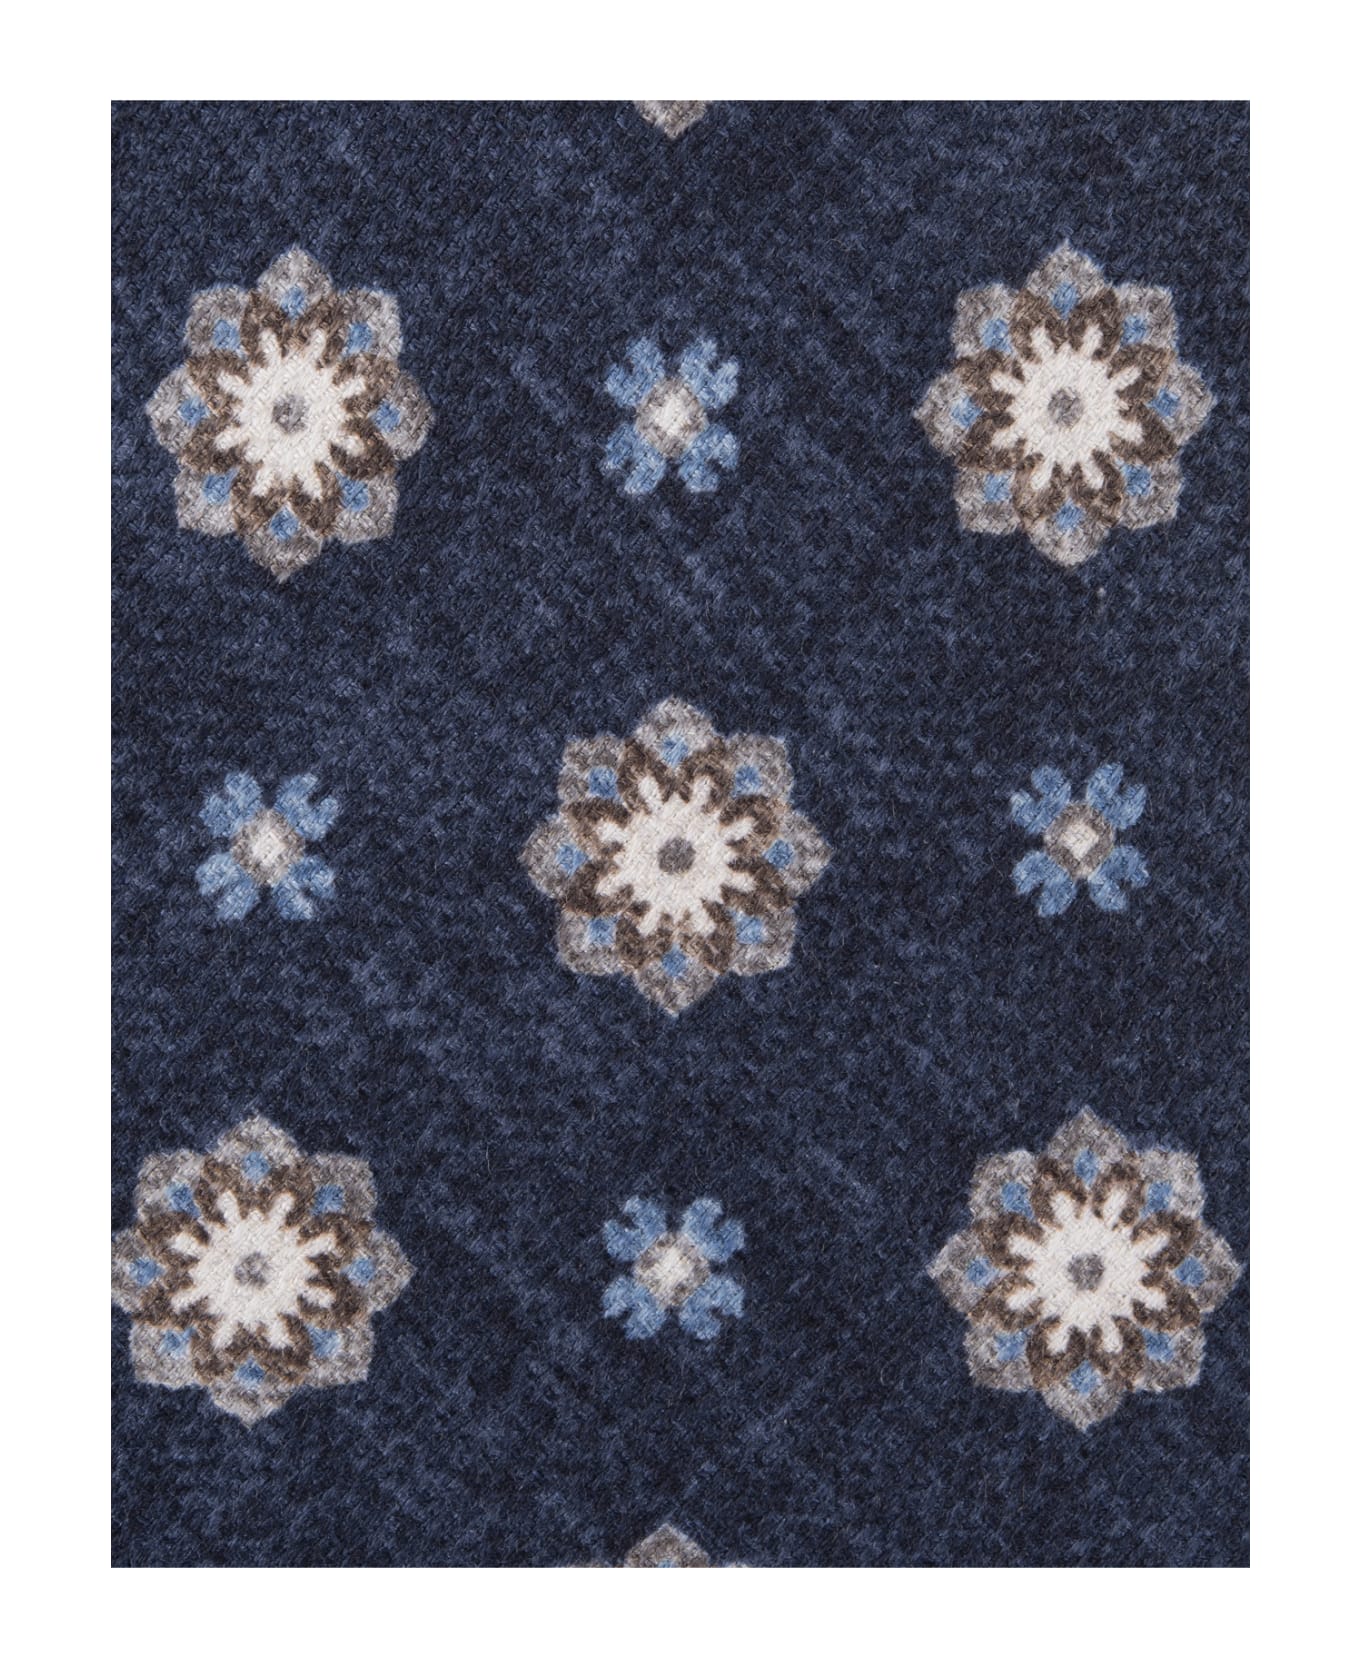 Kiton Navy Blue Tie With Flower Pattern - Blue ネクタイ